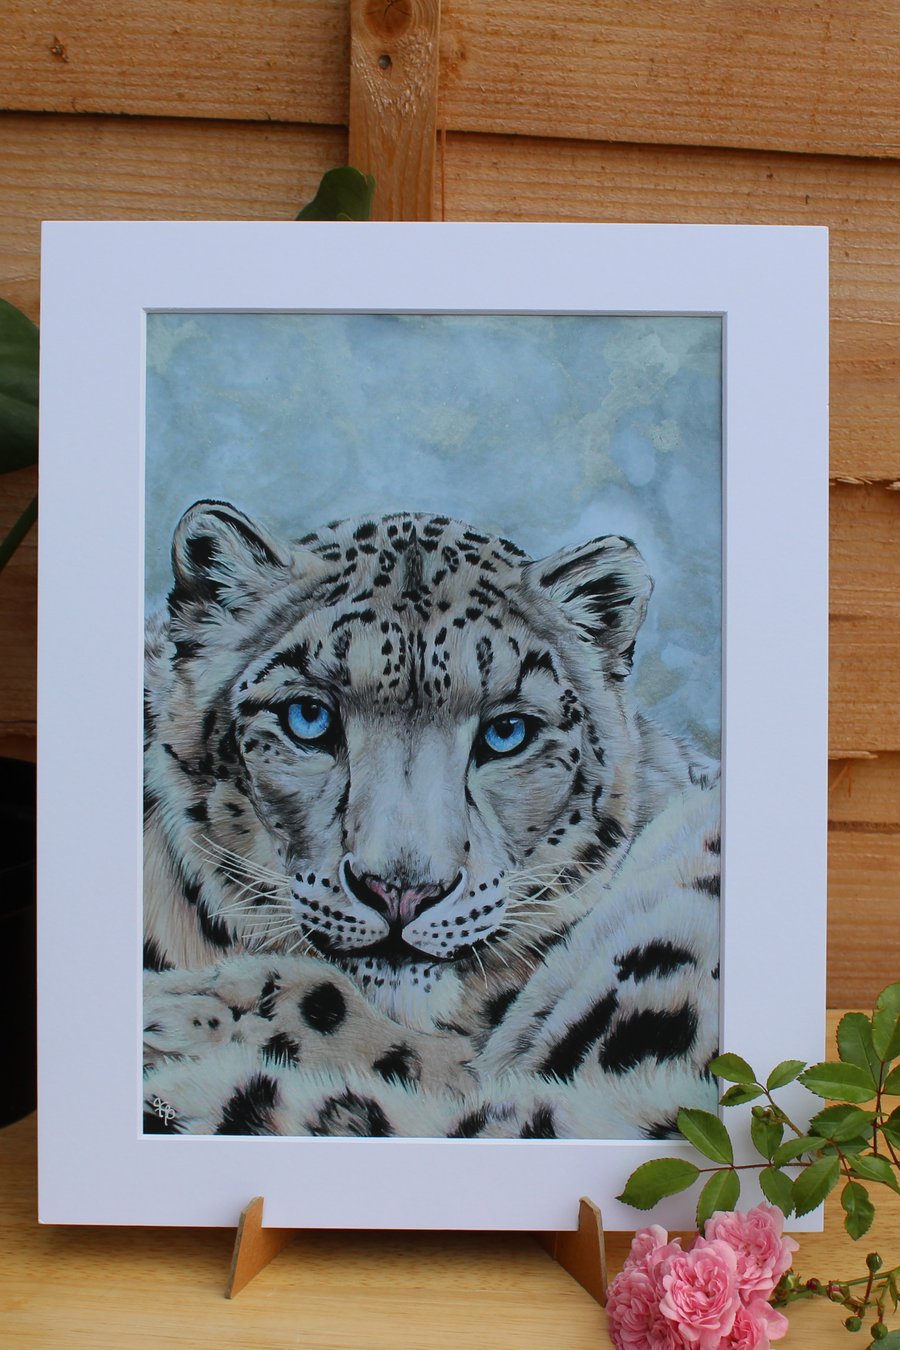 'Grey Ghost of the Mountain' Art Print - Not Mounted - Snow Leopard Wildlife Art